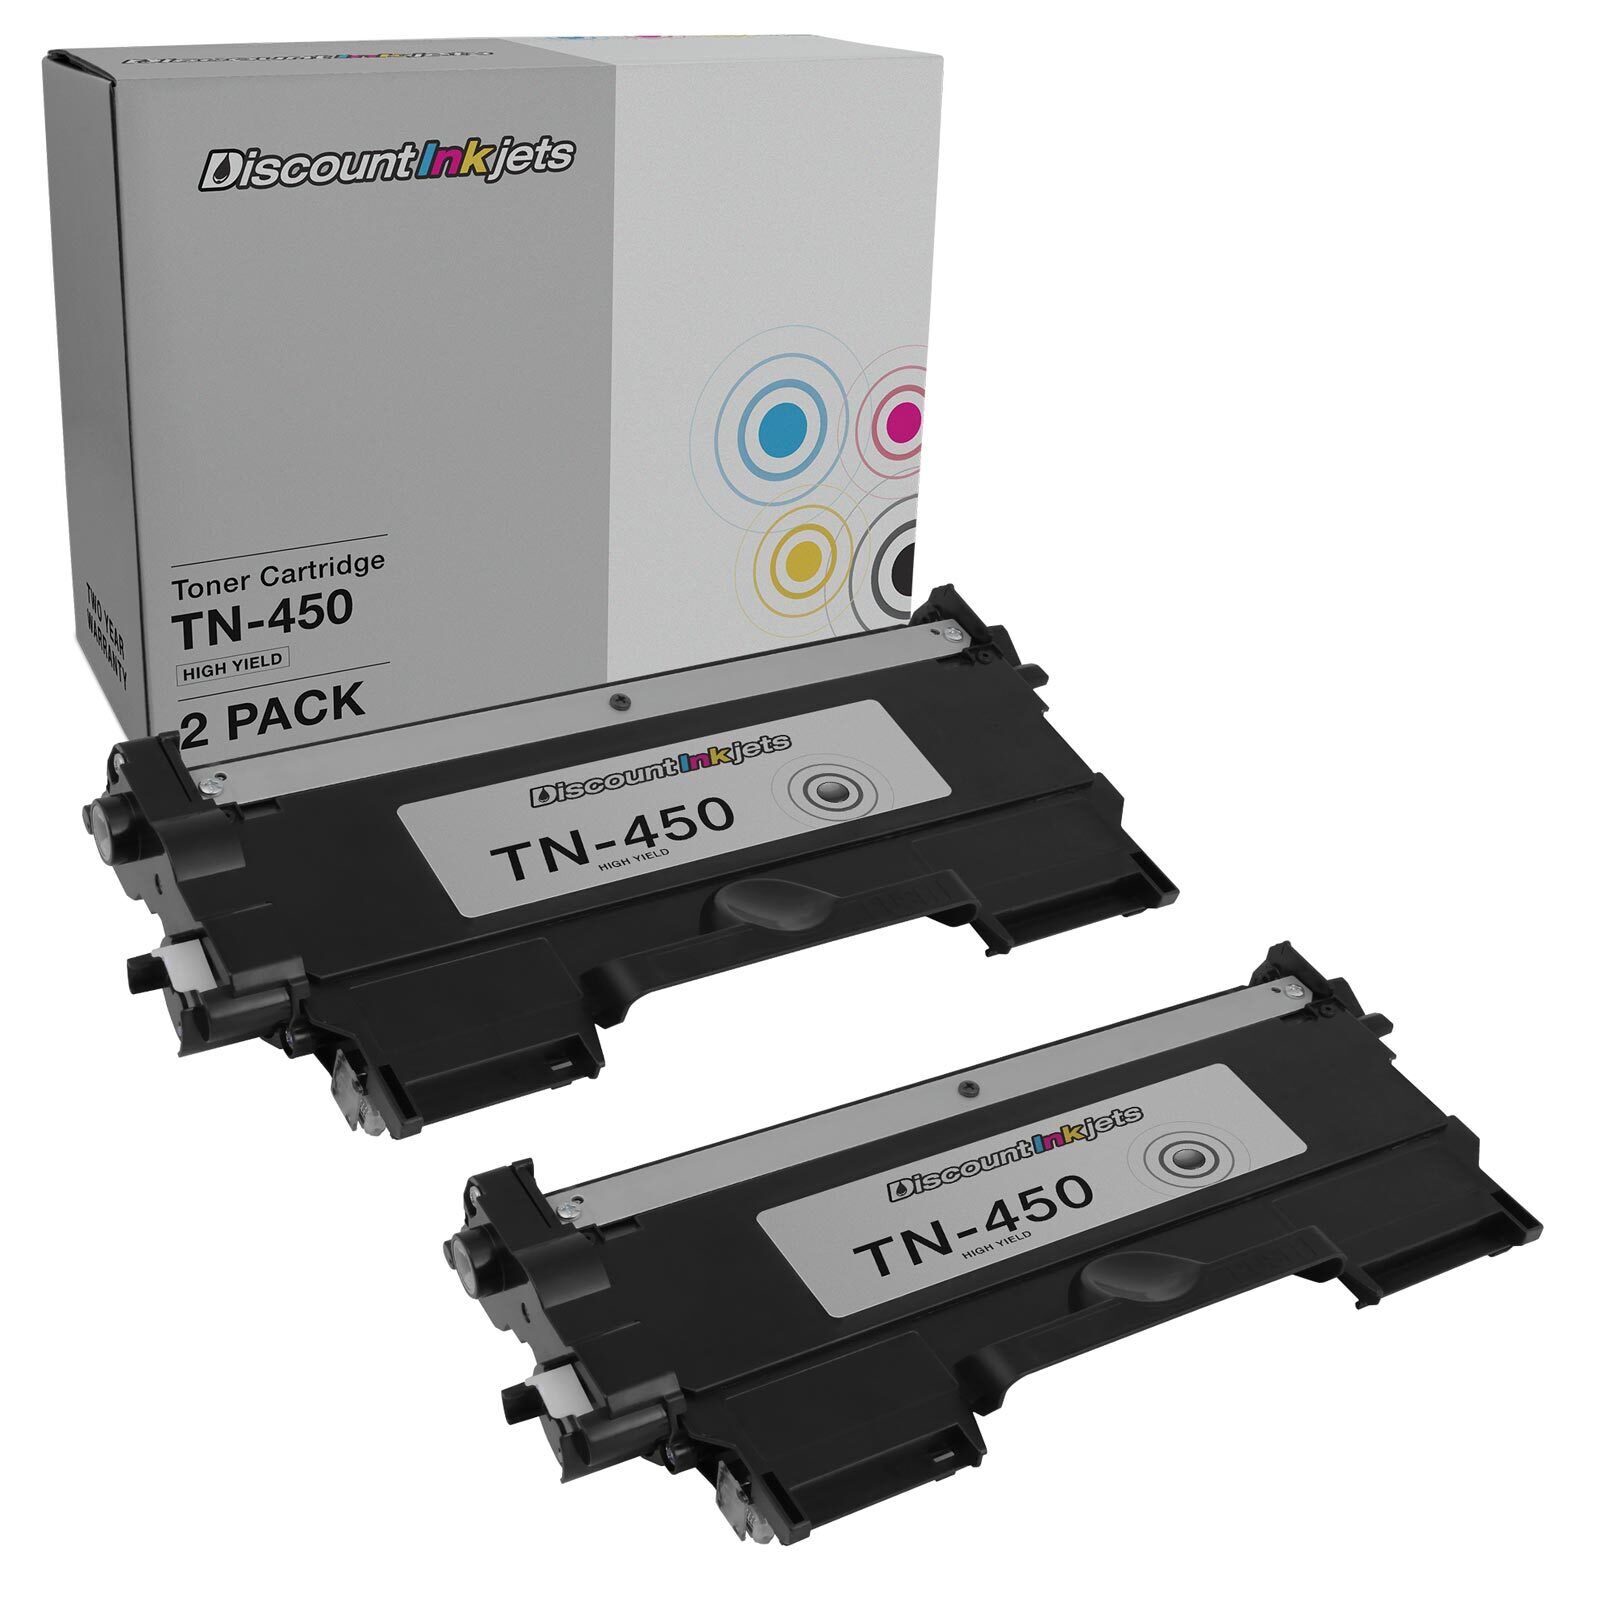 2PK Compatible for Brother TN450 TN-450 BLACK Toner Cartridge DCP-7060D DCP-7065